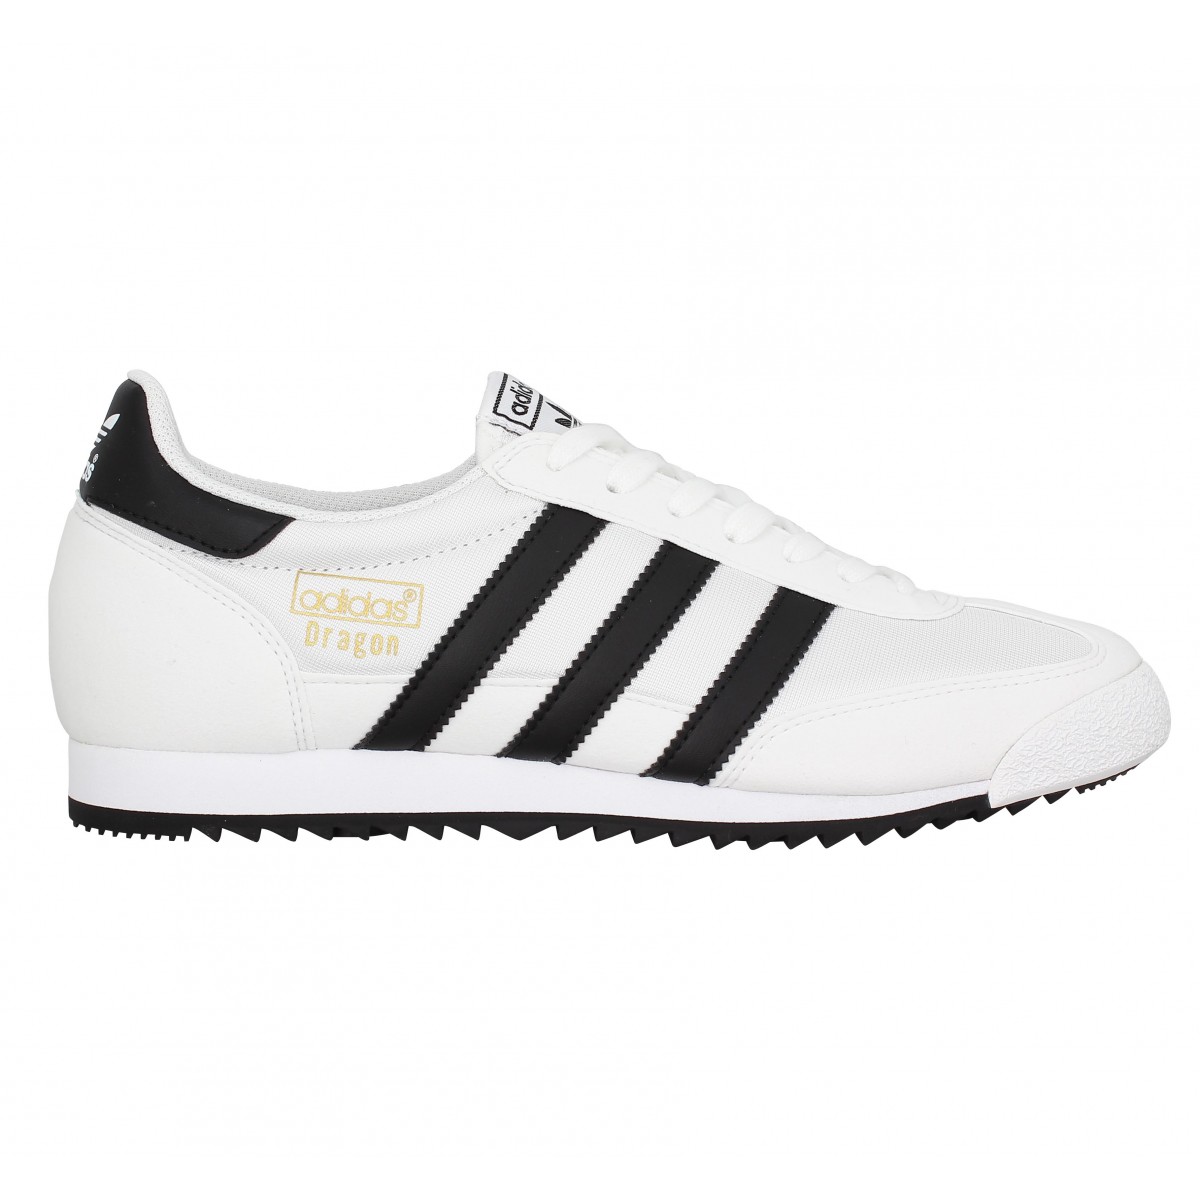 Chaussures Adidas dragon og blanc homme | Fanny chaussures